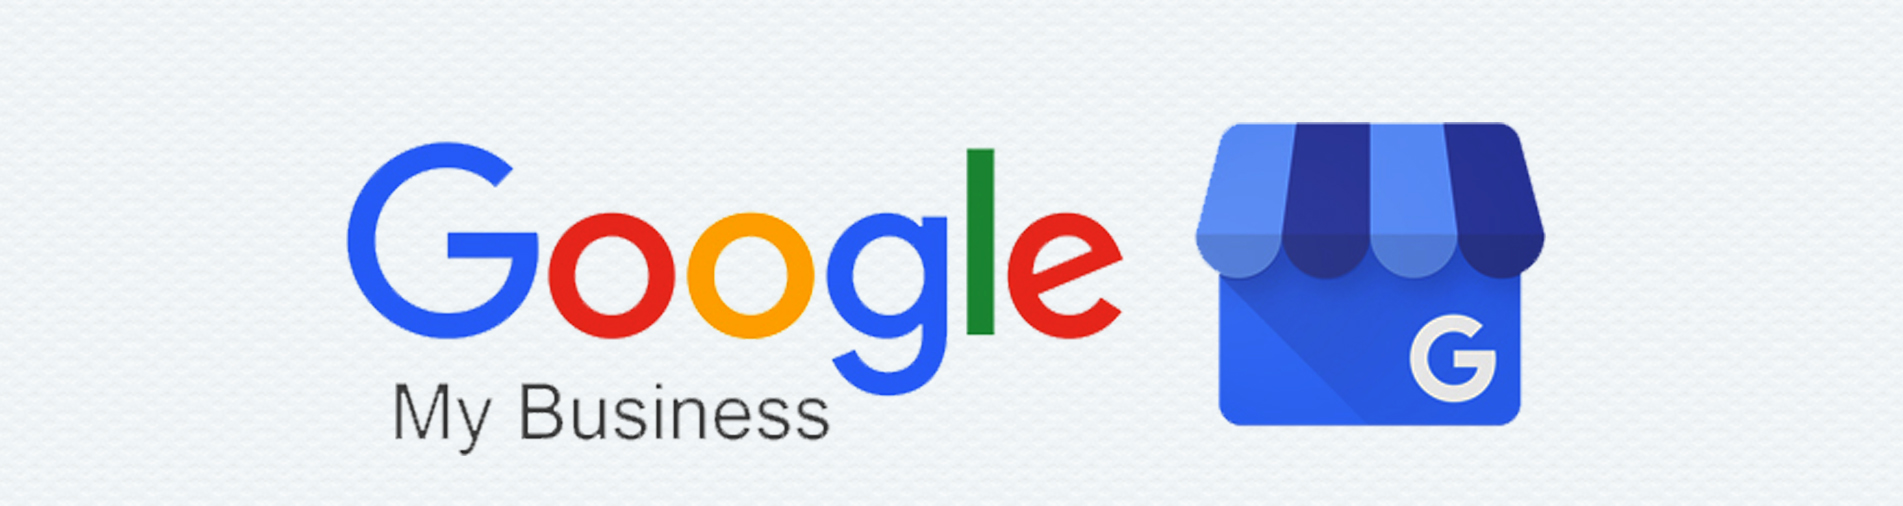 Google My Business Optimization Most Valued for Local Businesses